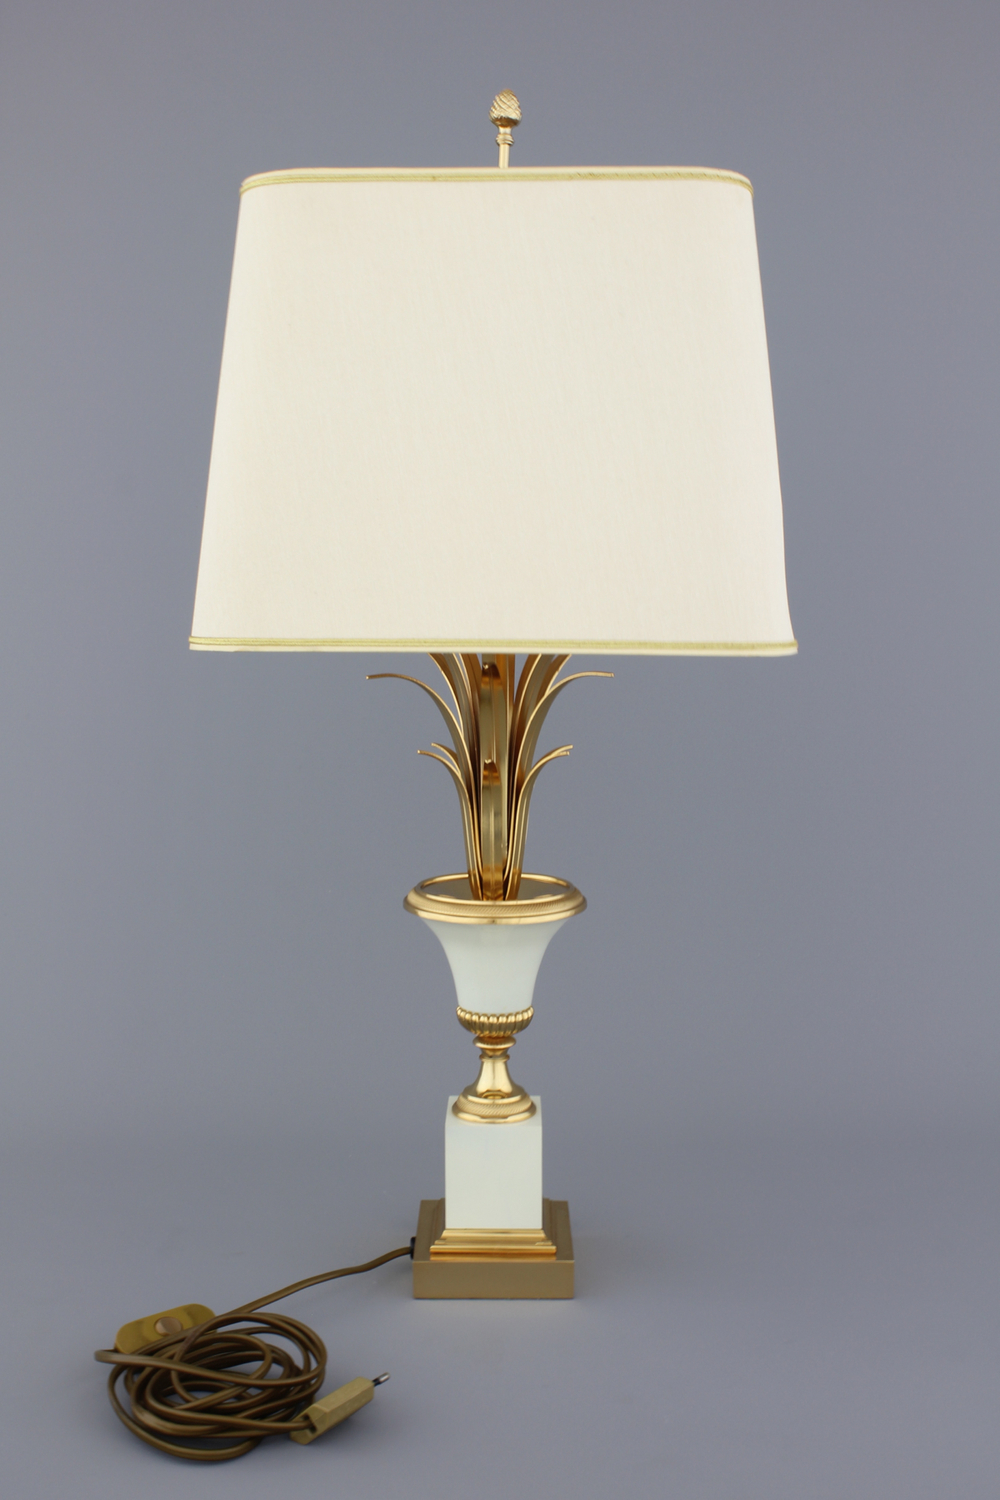 A fine Maison Charles style lamp with square shape, 2nd half 20th C.